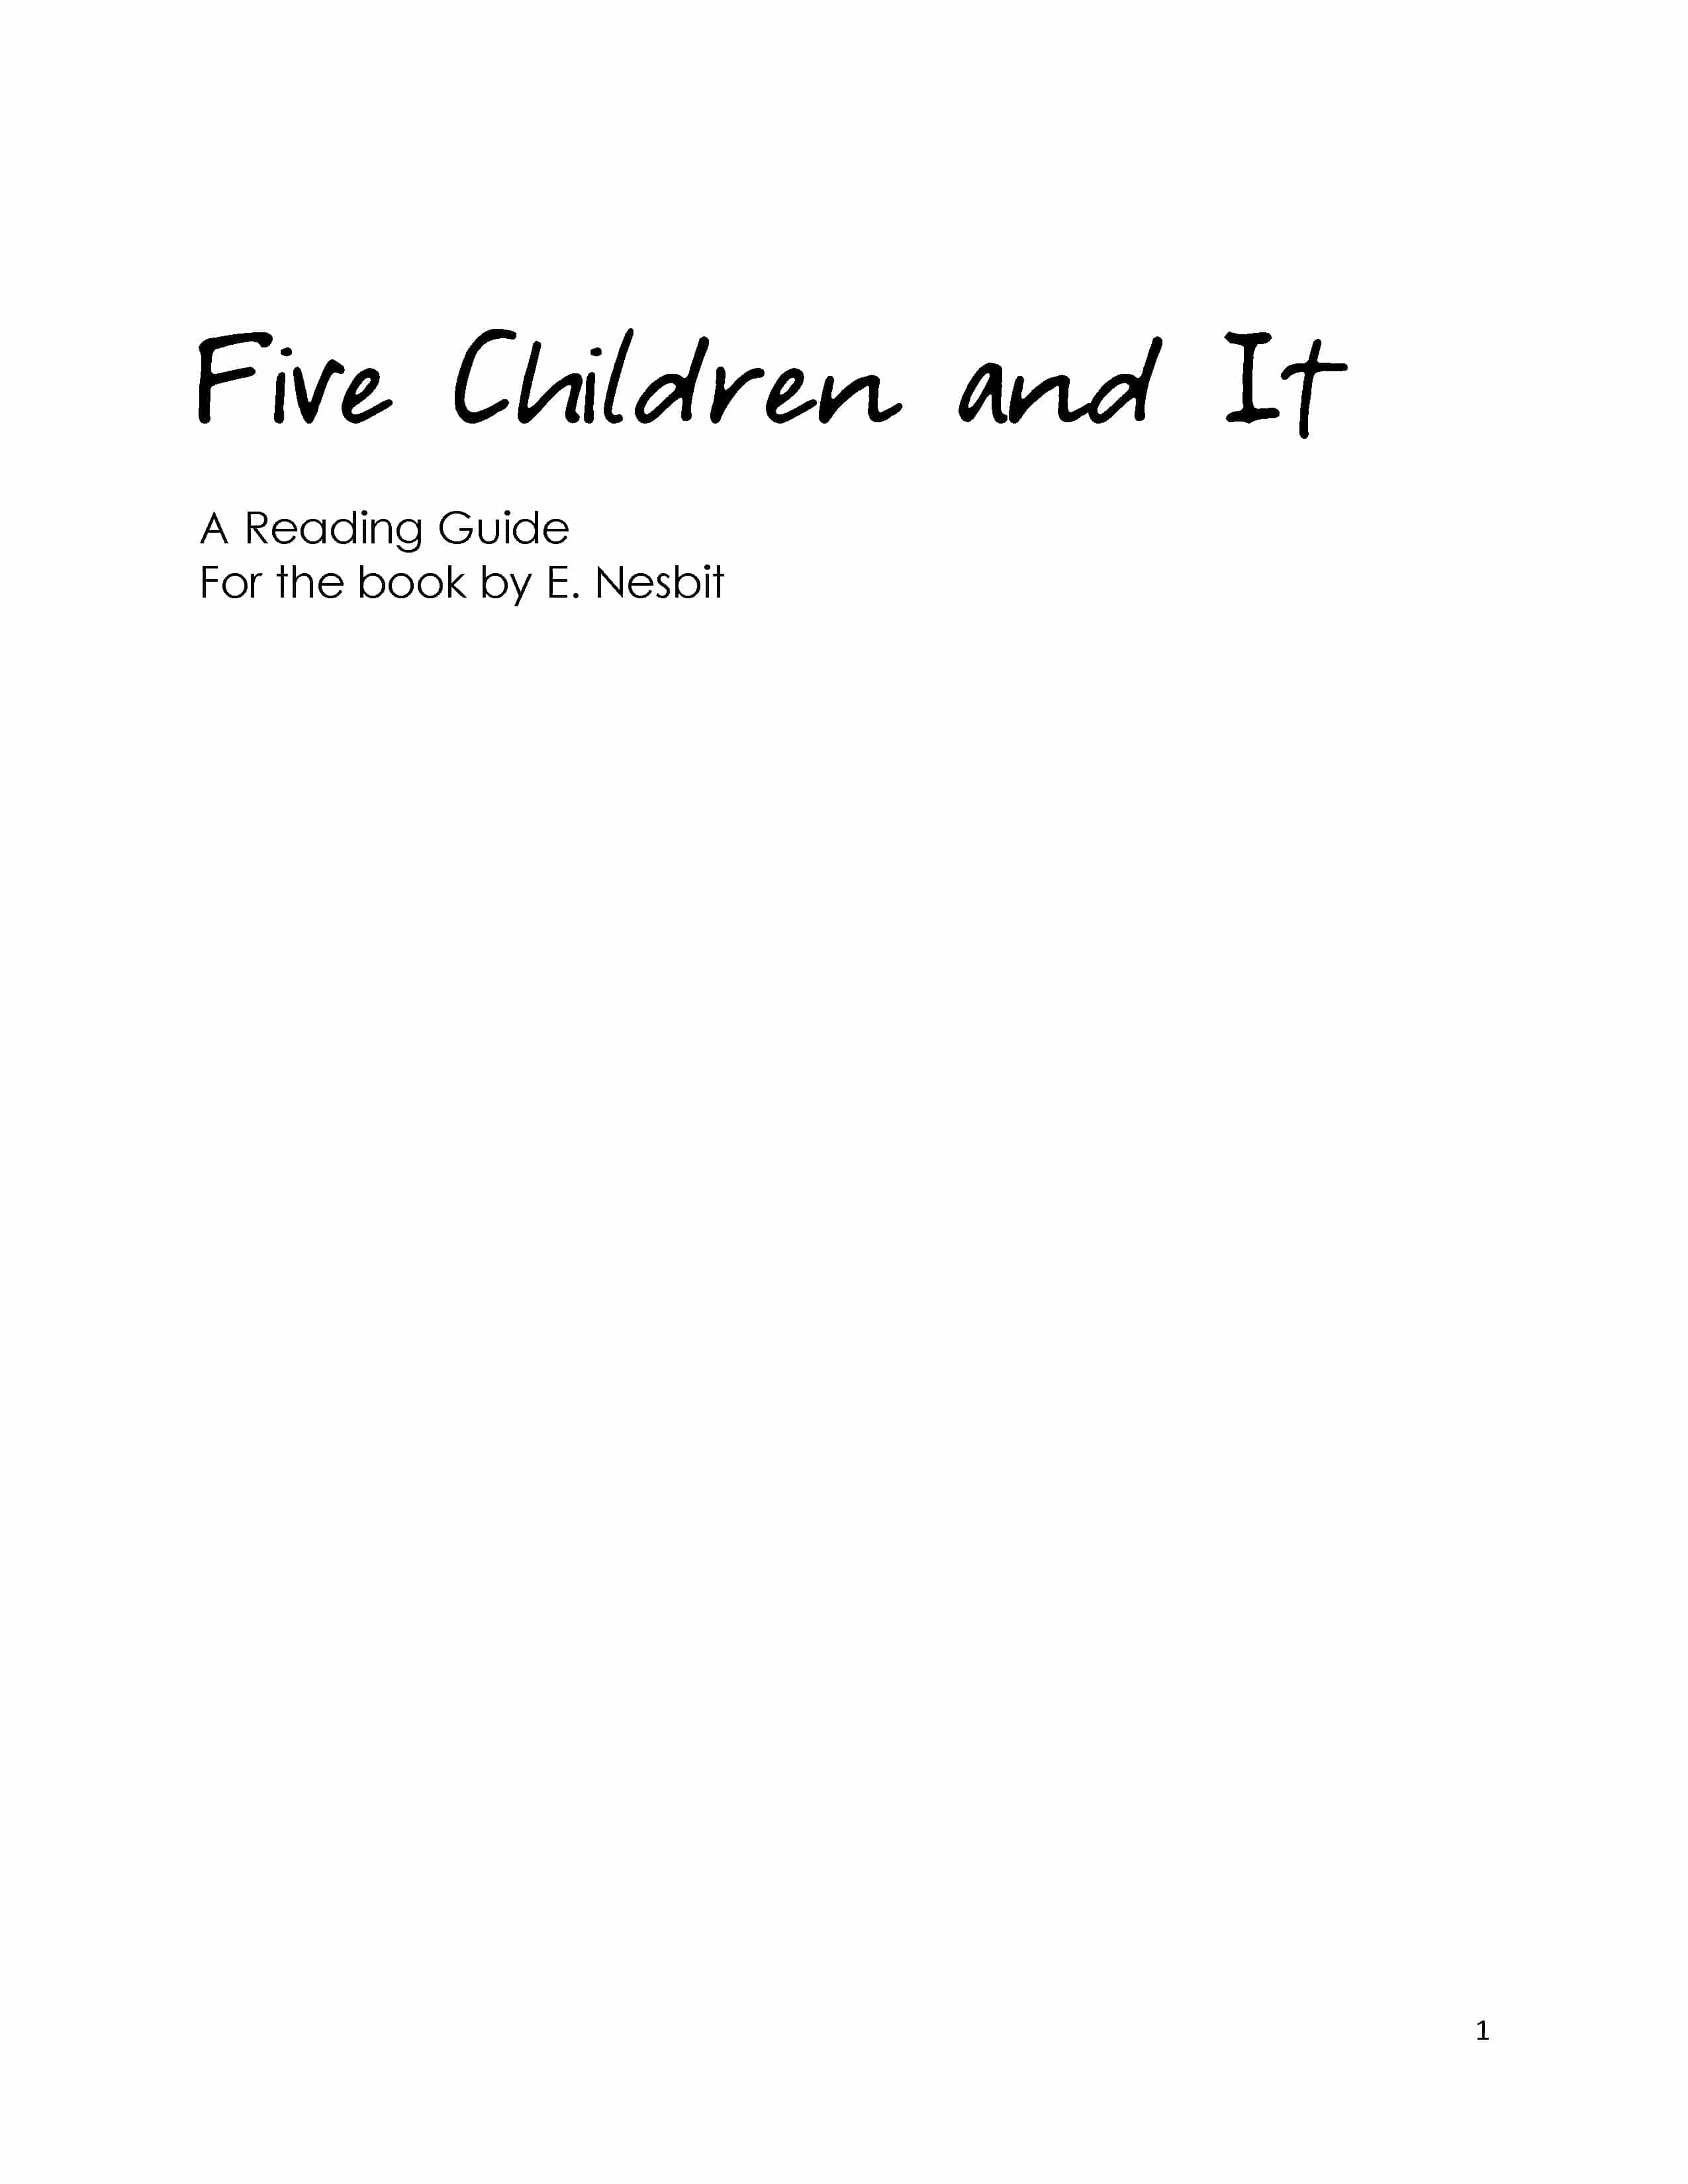 five-children-and-it-reading-guide-download